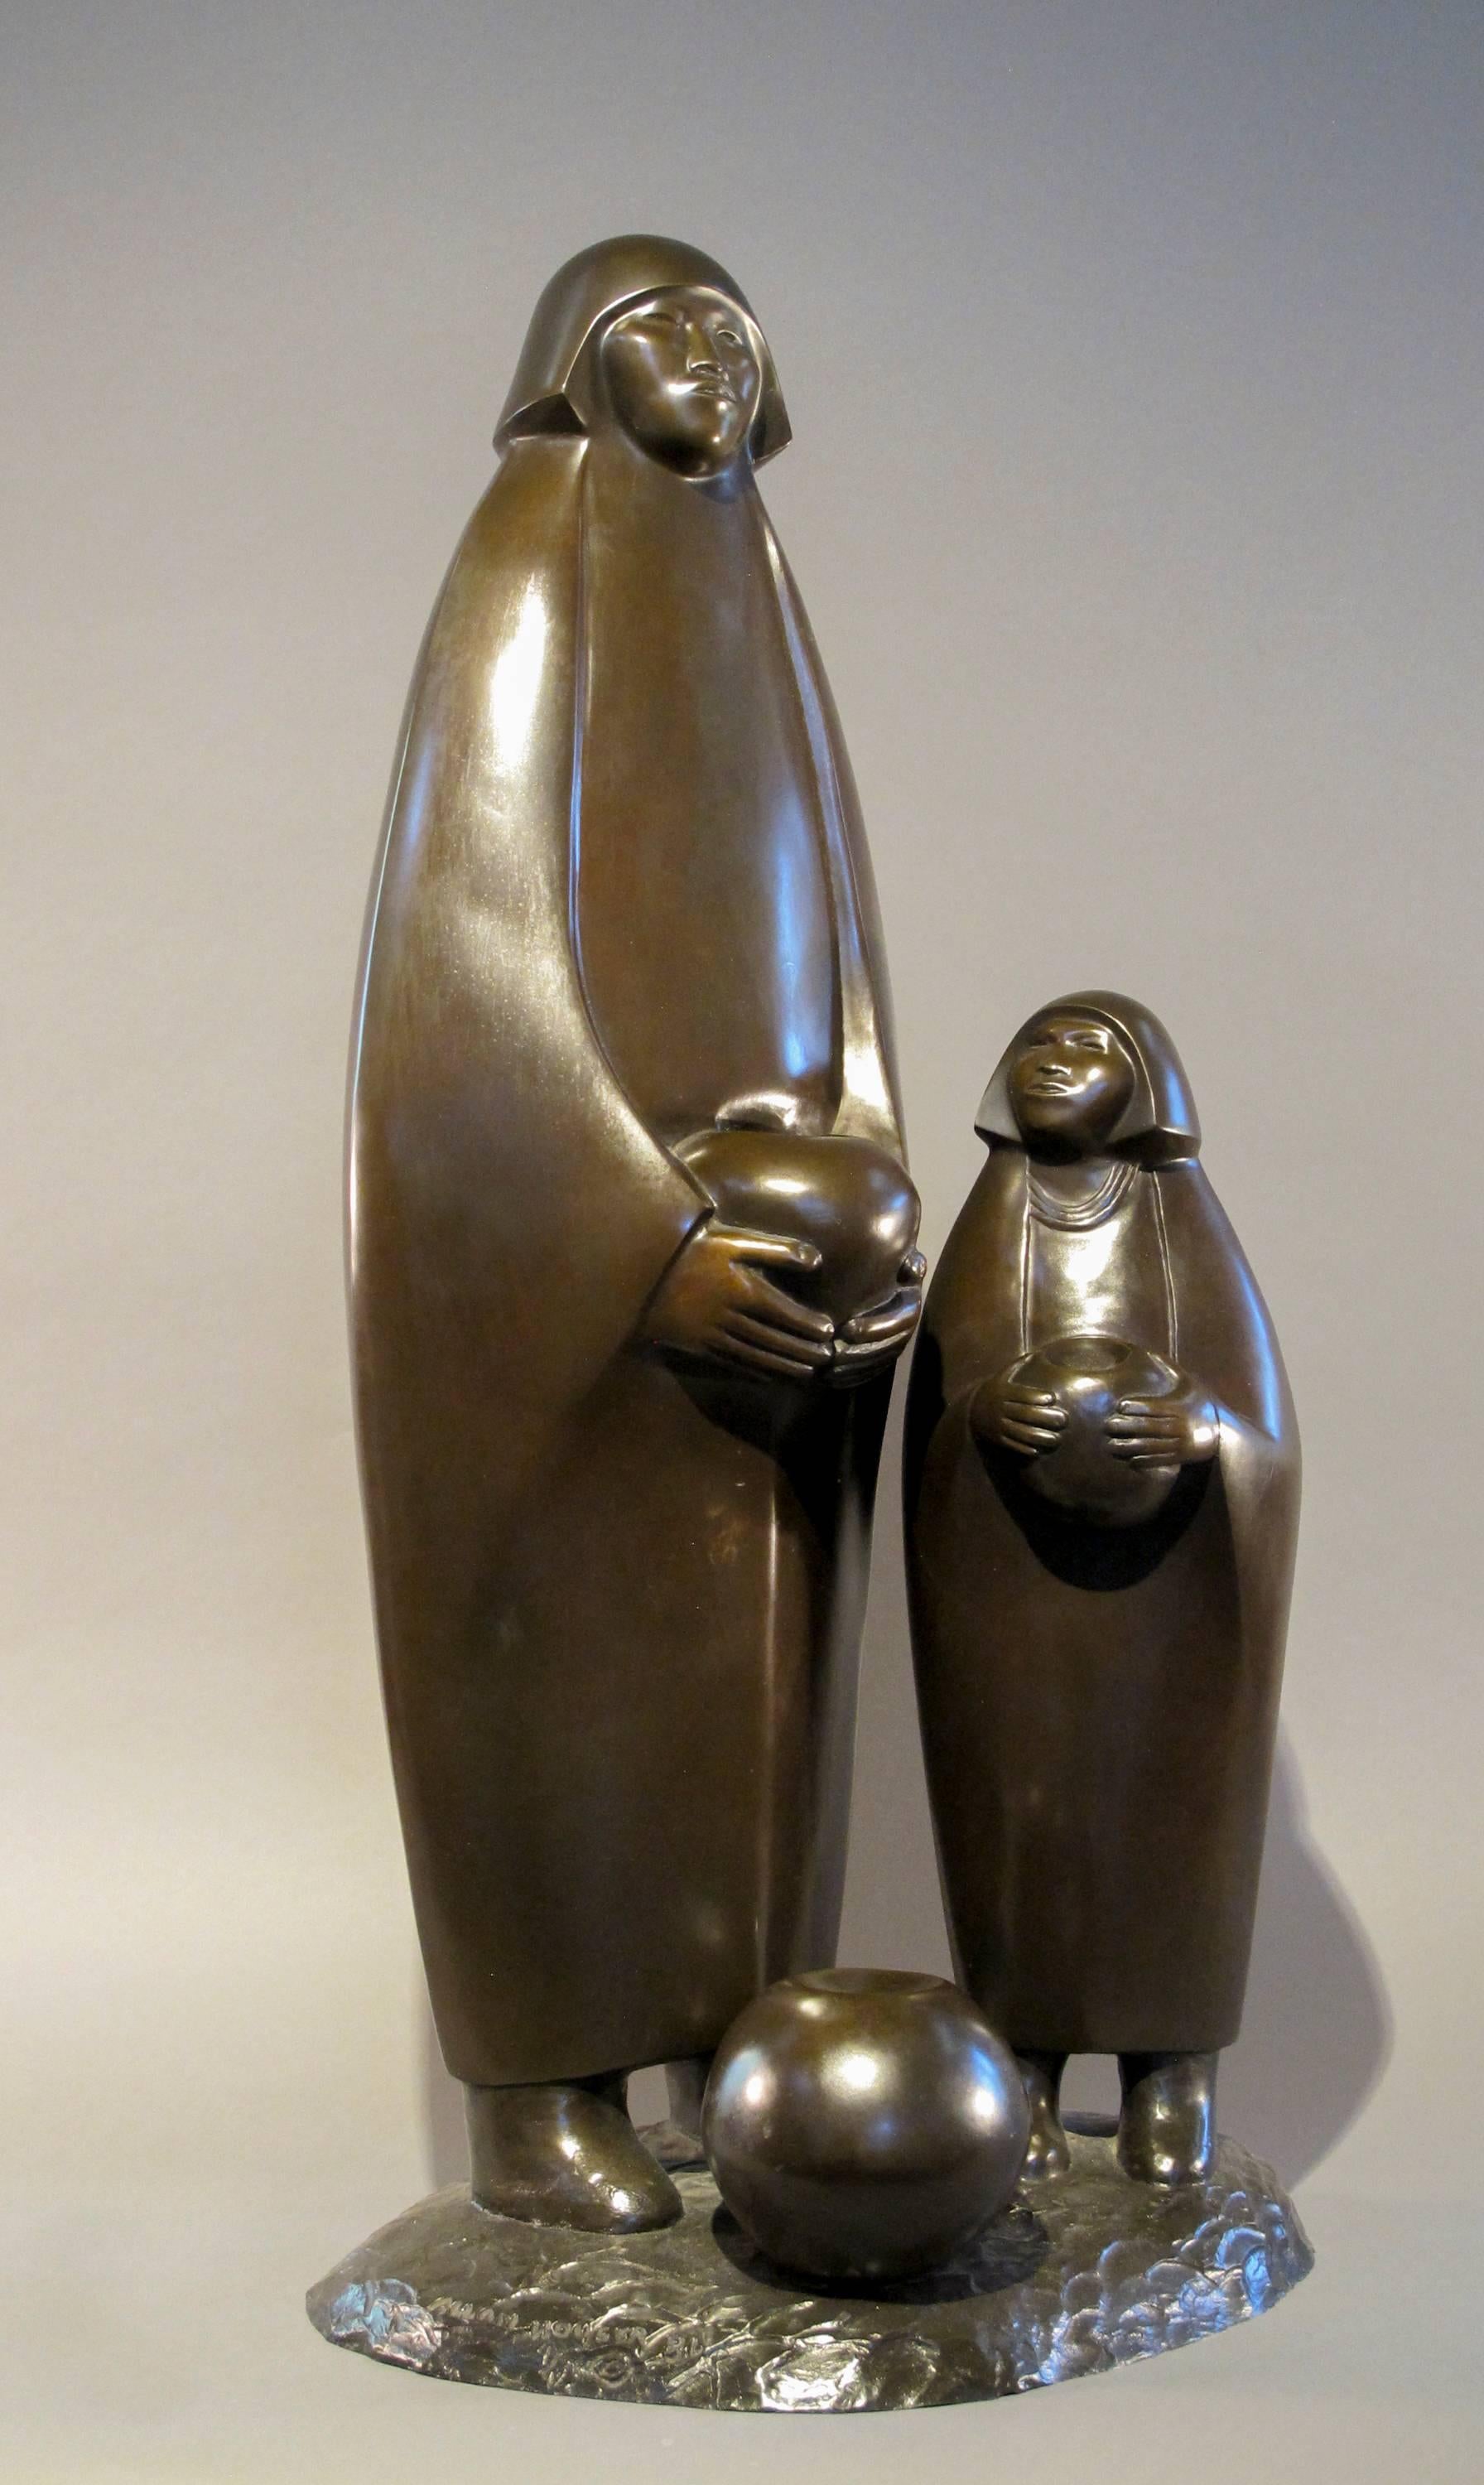 The Young Potter, bronze sculpture, Pueblo mother and child - Sculpture by Allan Houser